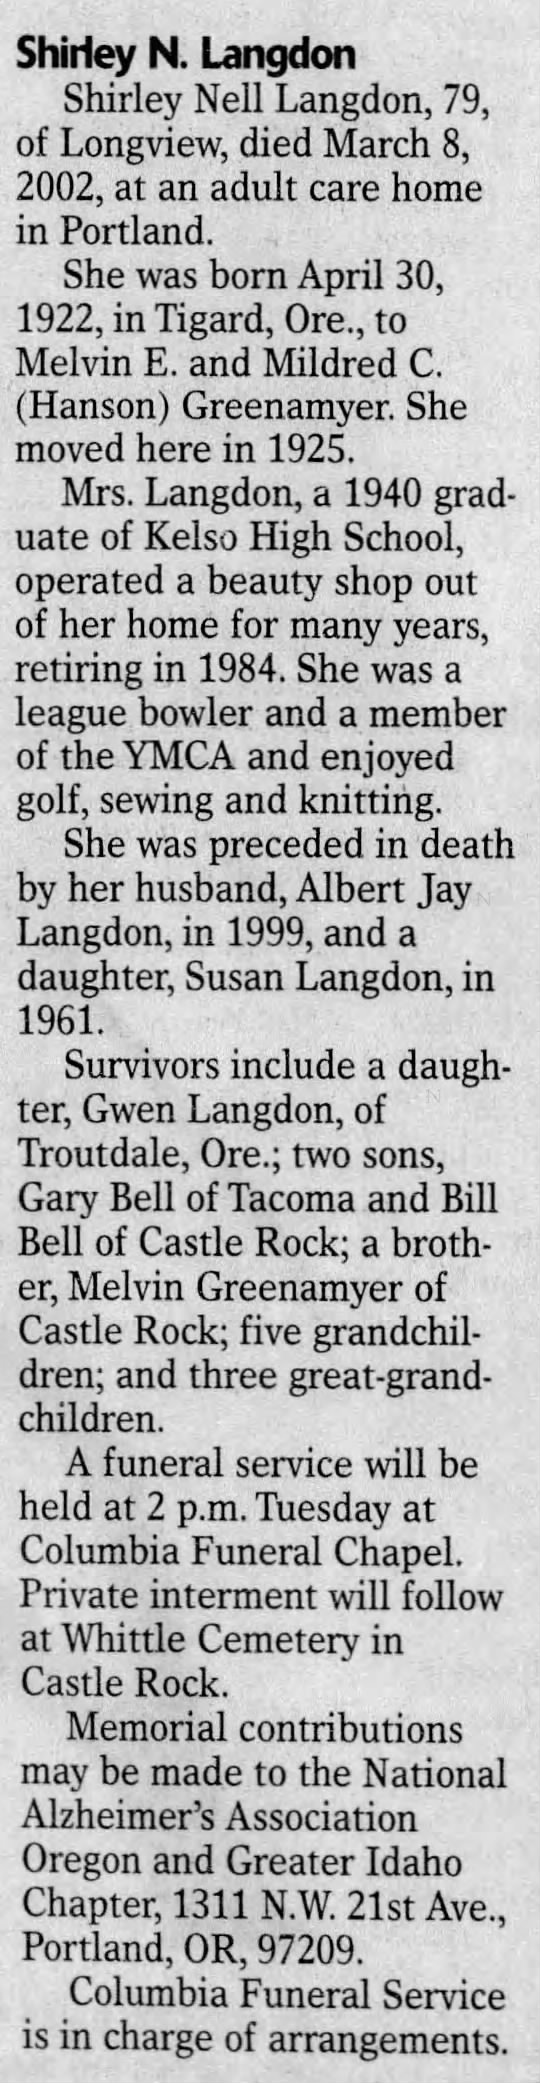 Obituary for Shirley Nell Langdon, 1922-2002 (Aged 79)